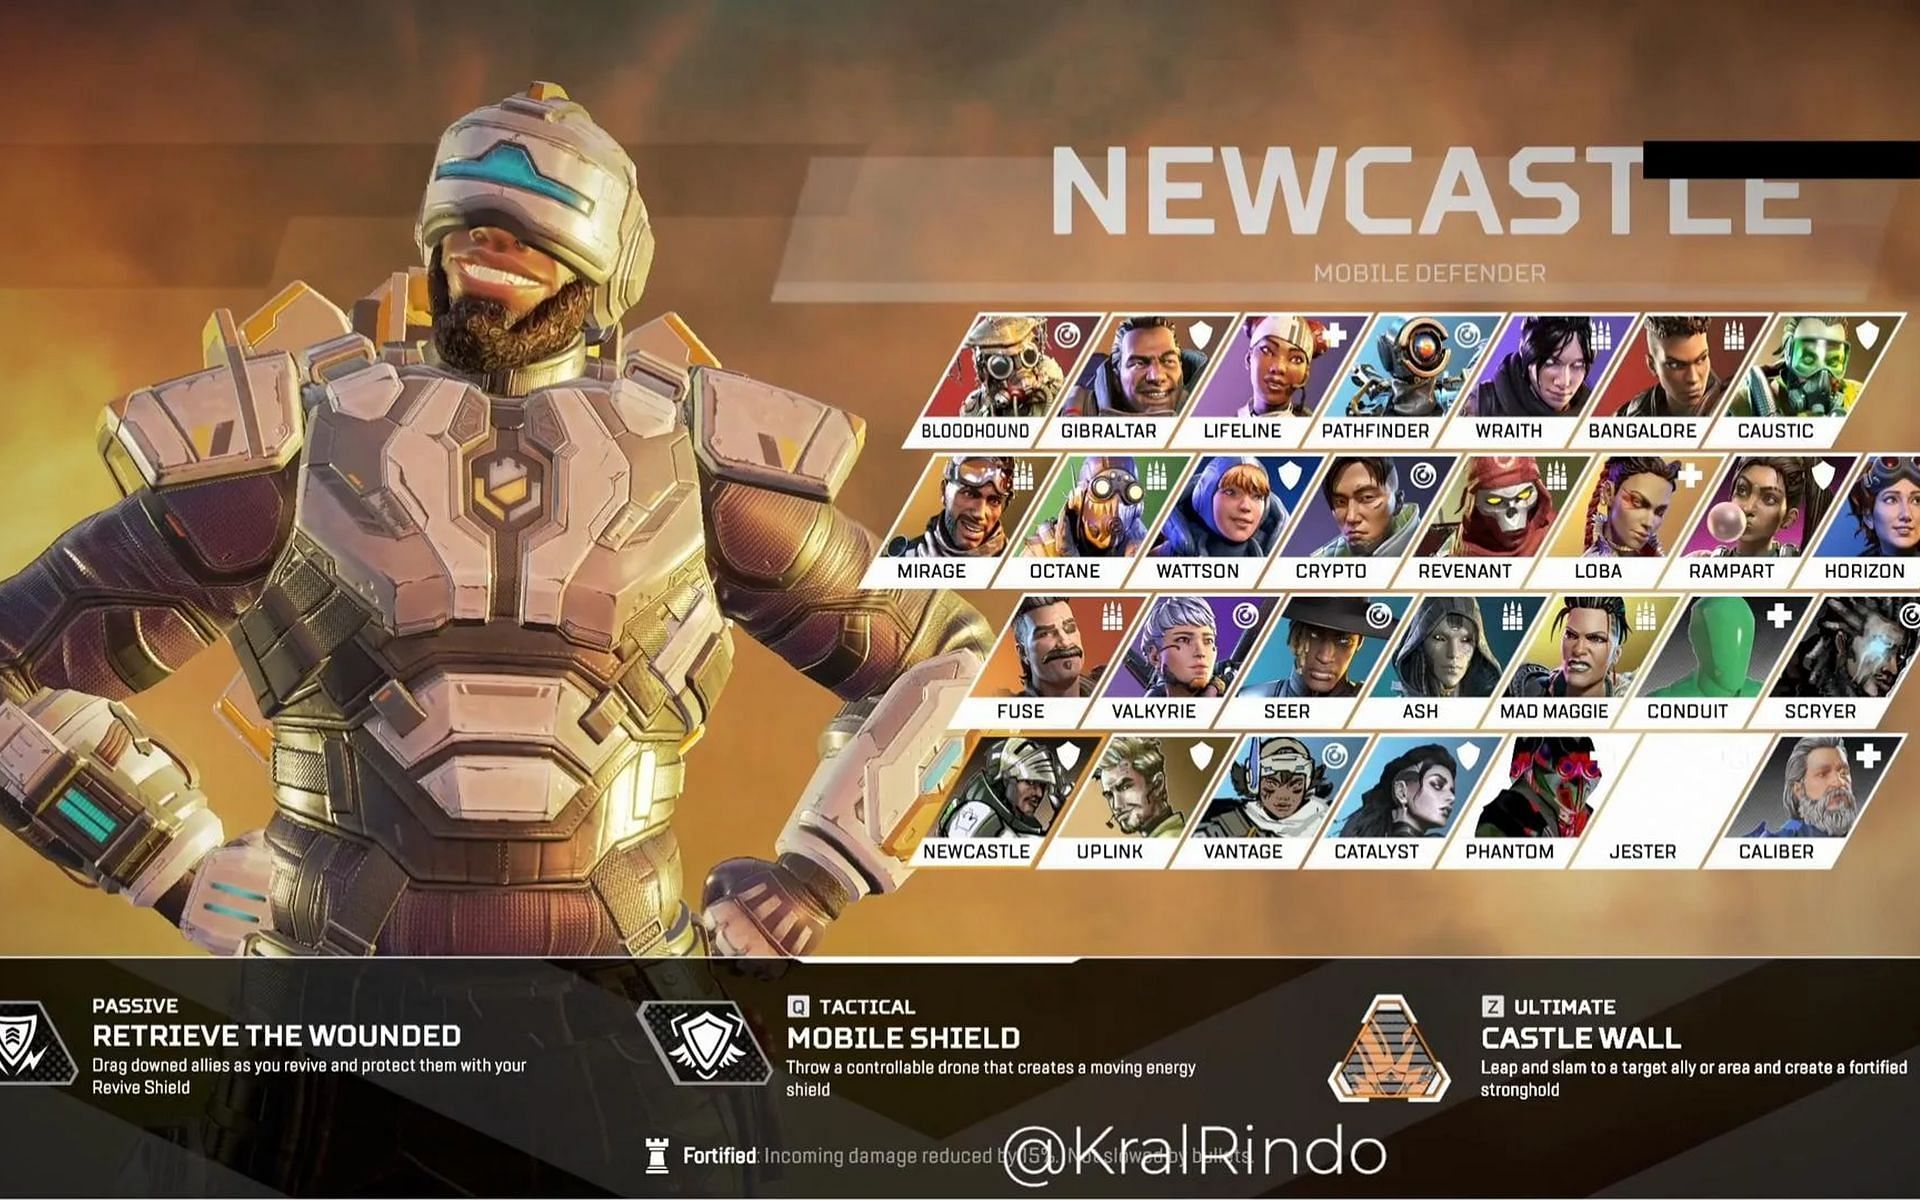 The abilities of the recently leaked Apex Legends character &quot;Newcastle&quot; (Image via Respawn Entertainment)